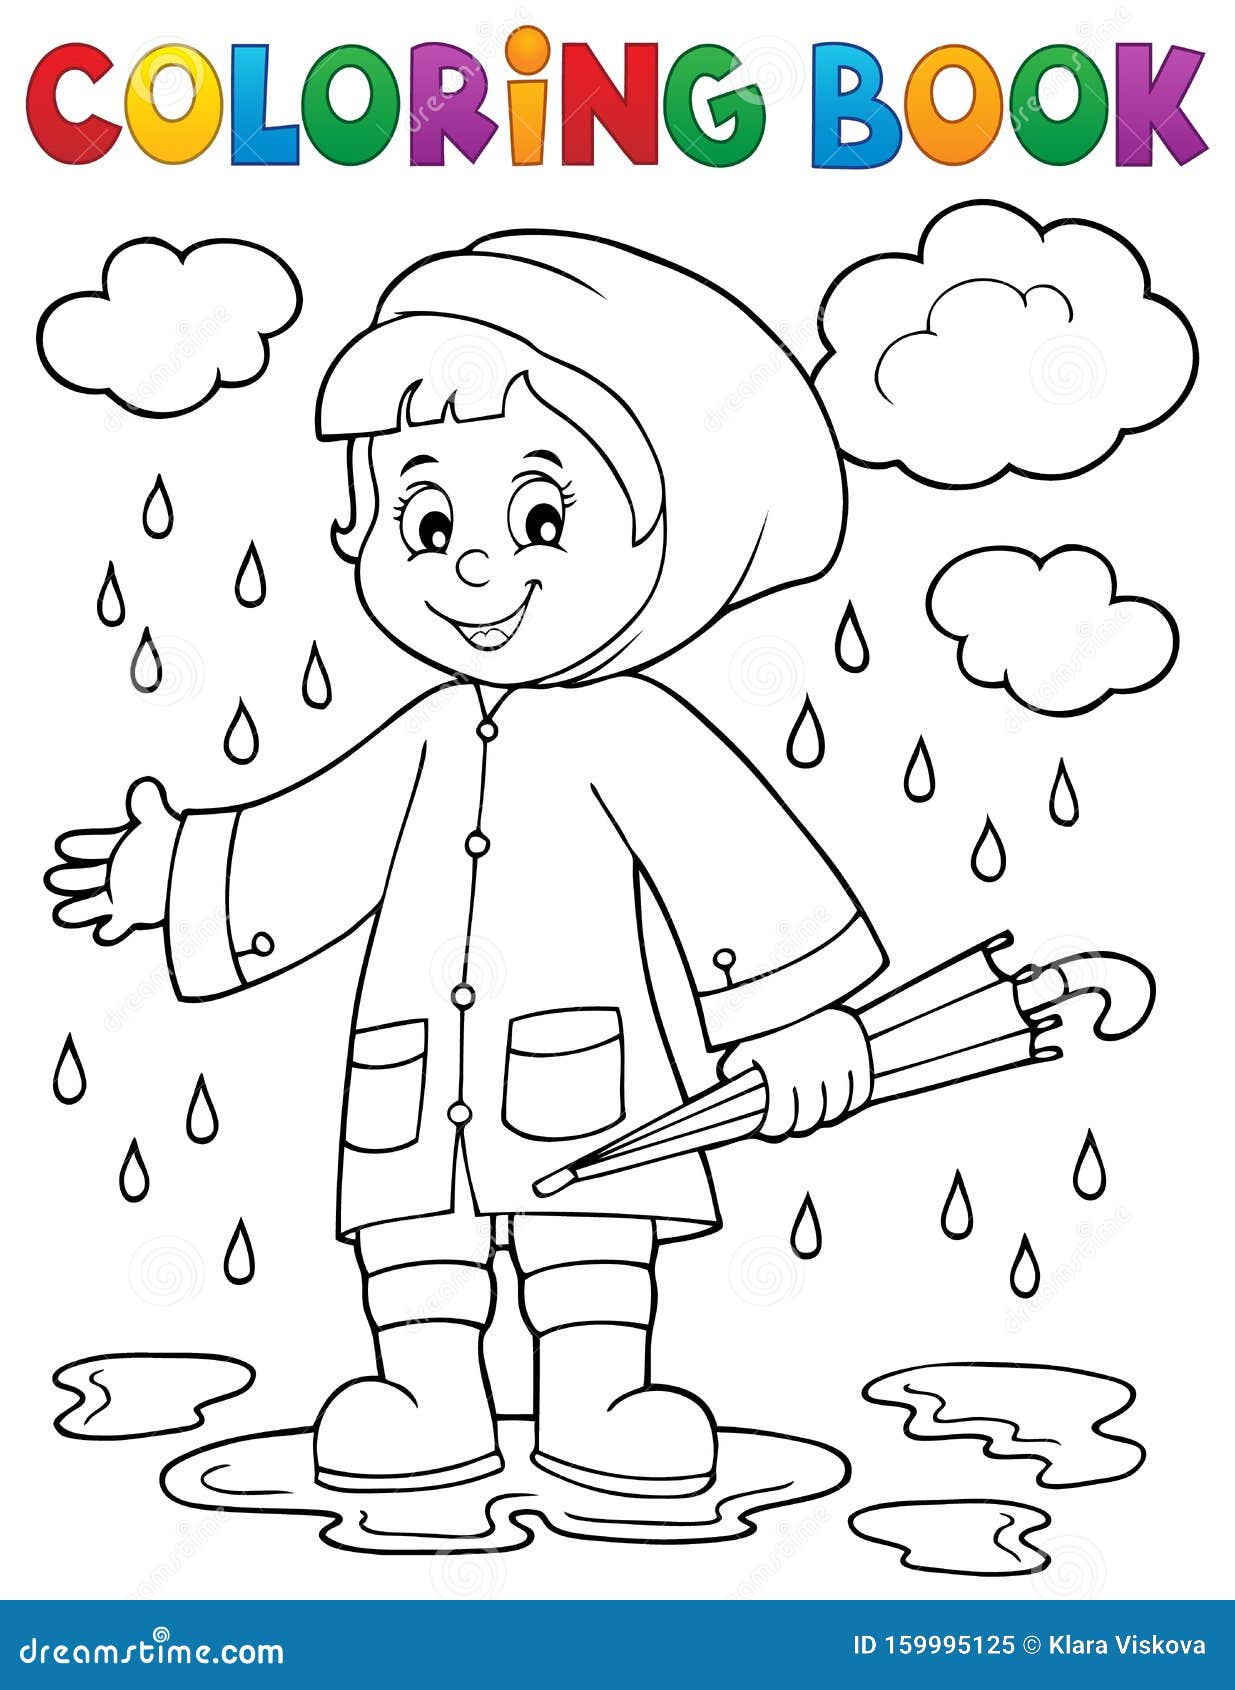 Coloring book girl in rainy weather stock vector